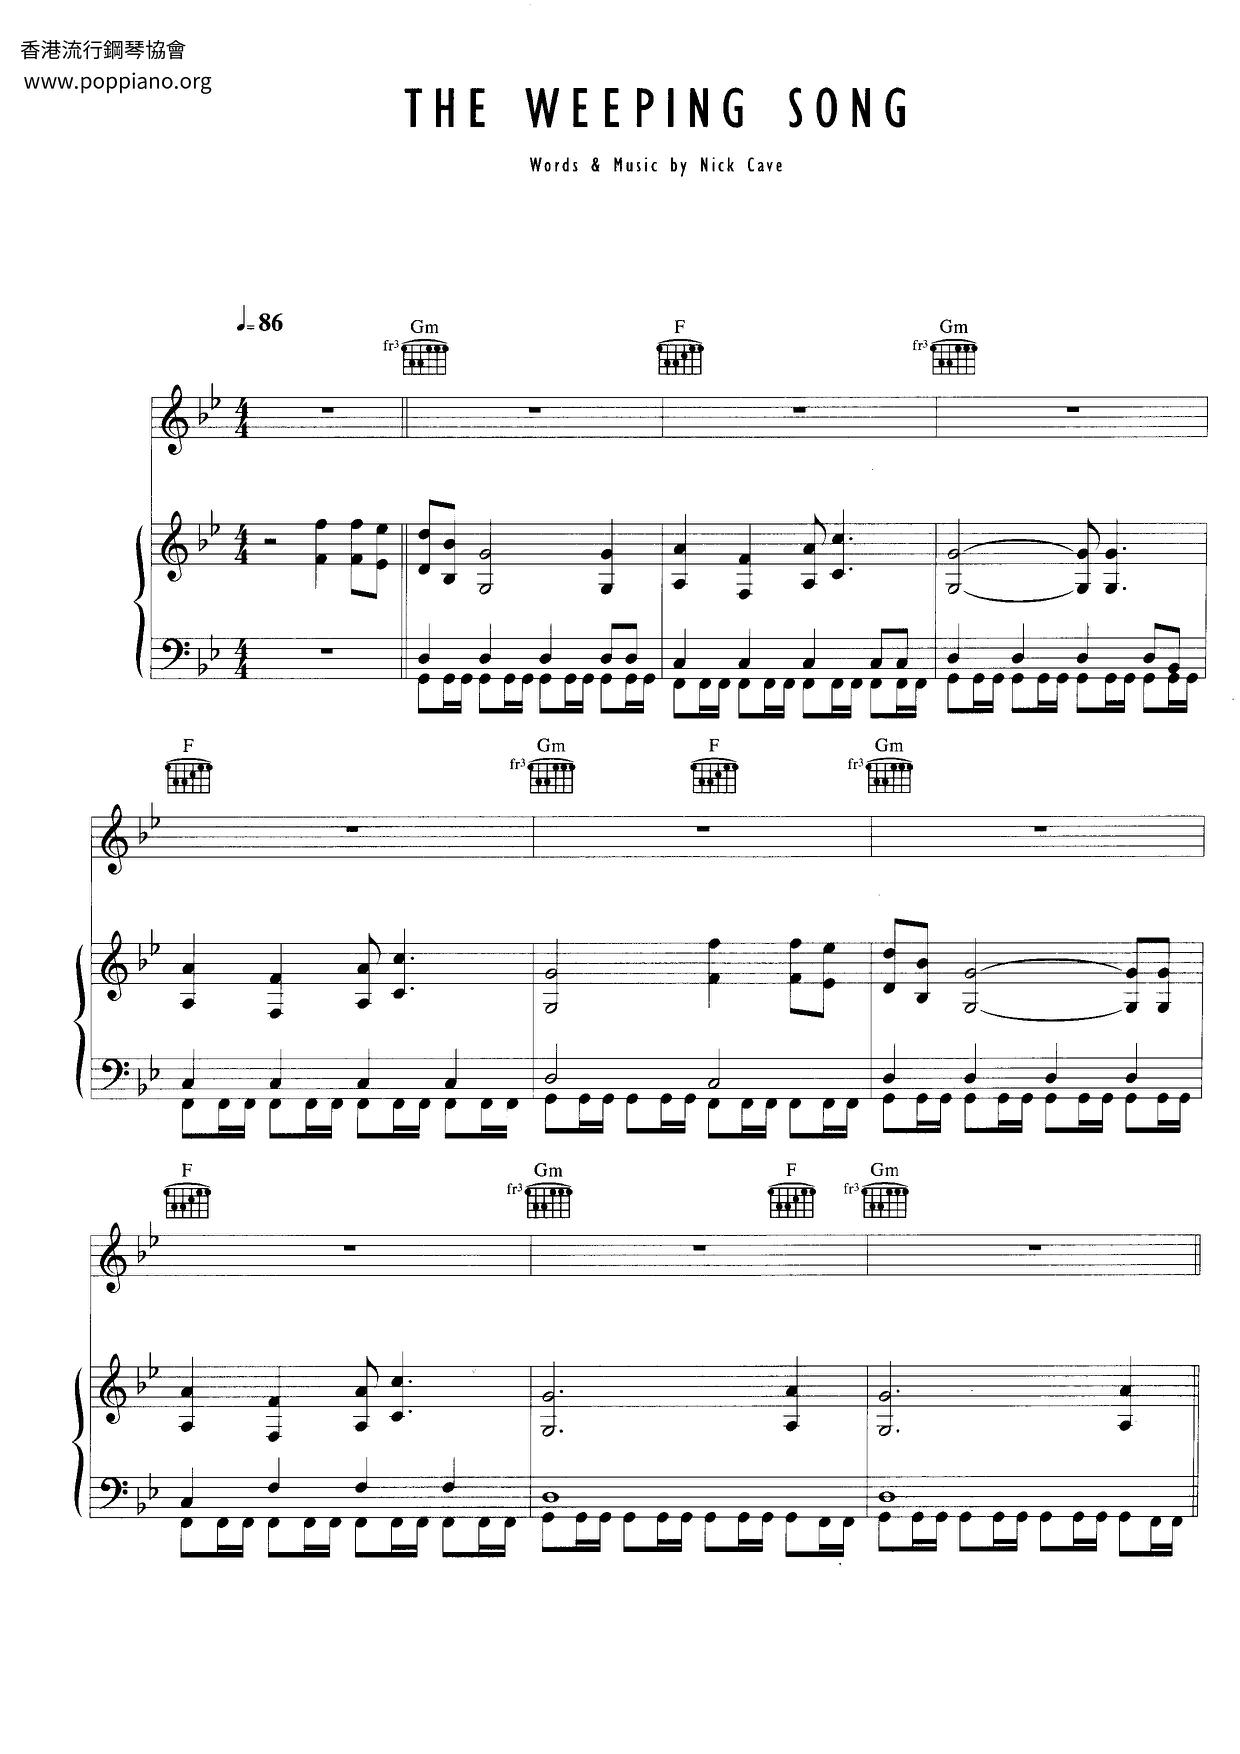 The Weeping Song Score